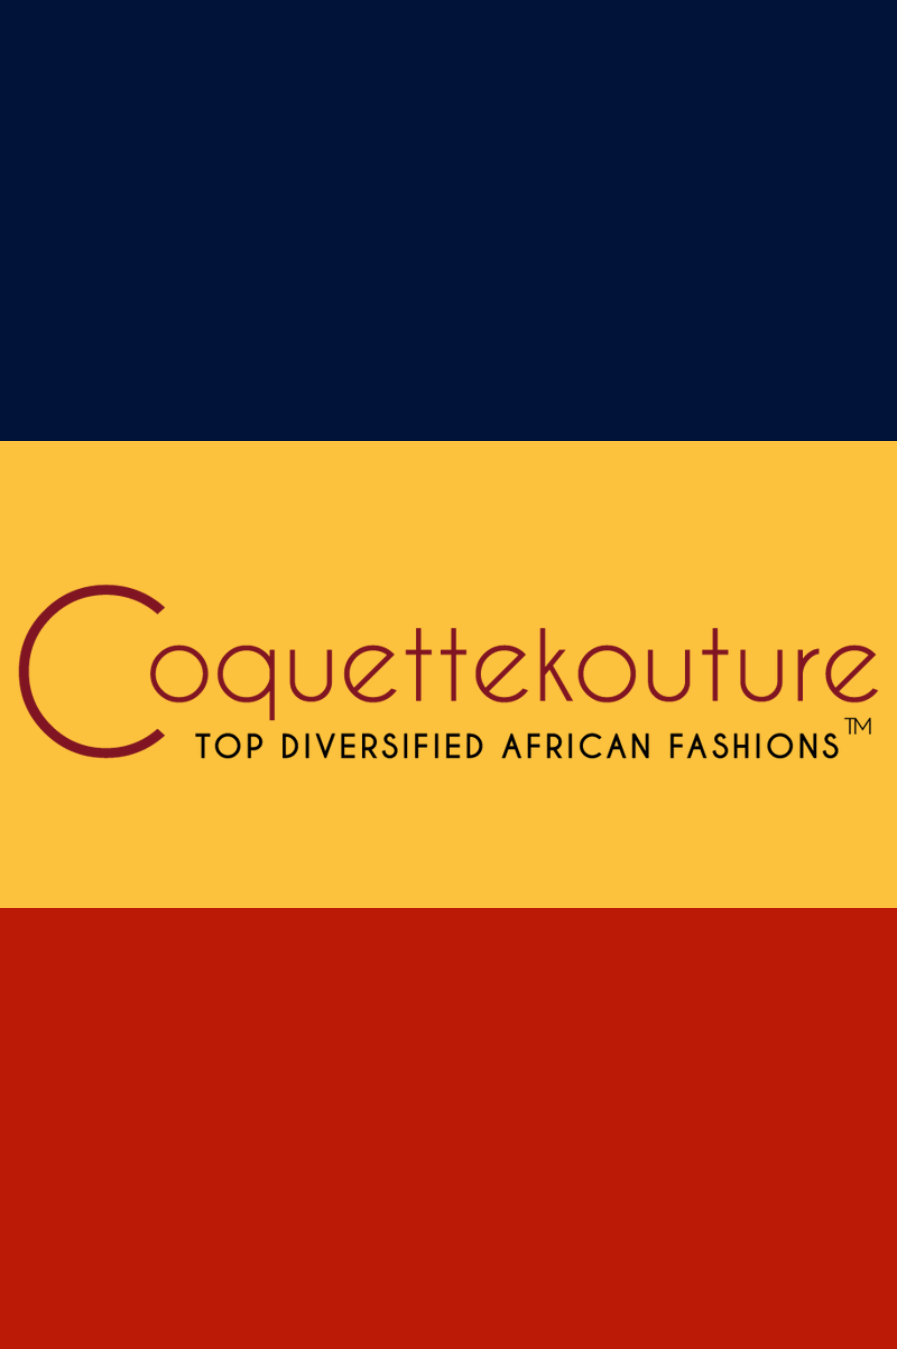 COQUETTEKOUTURE GIFT CARDS